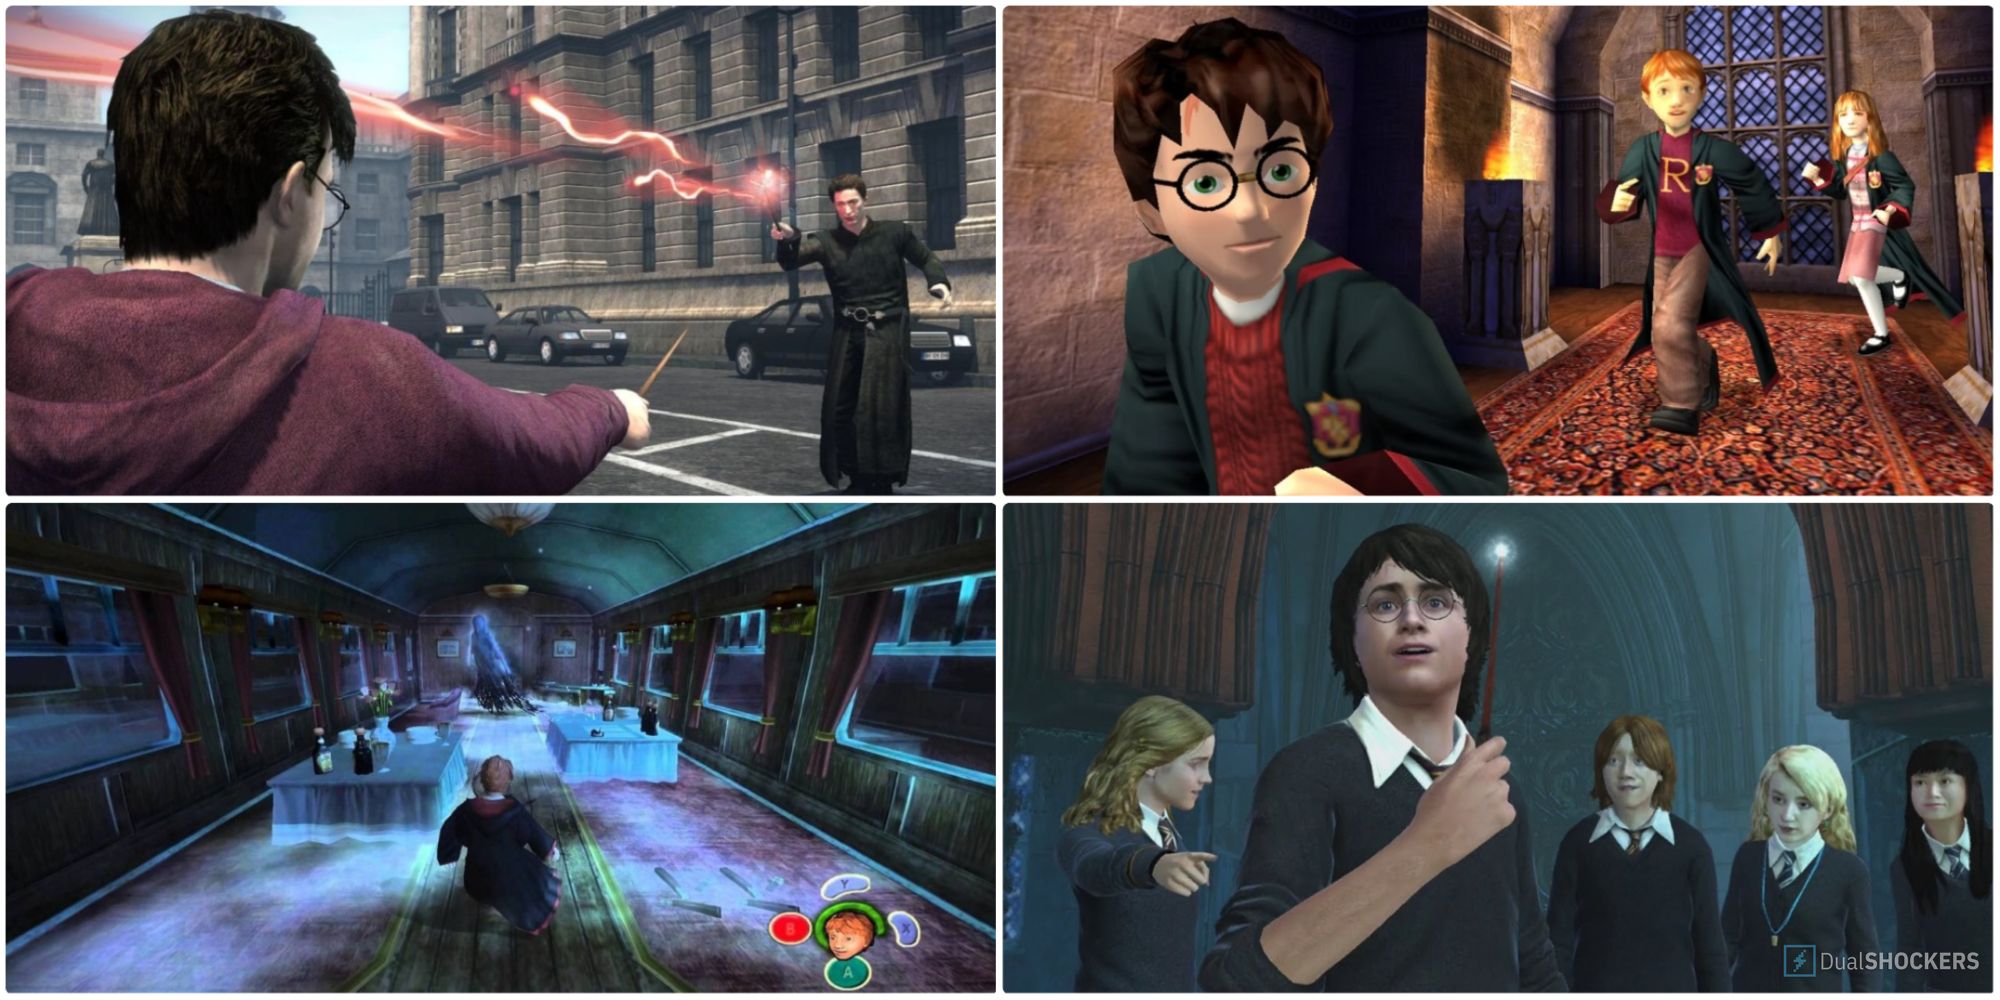 A Collage Of Screenshots From The Harry Potter Games